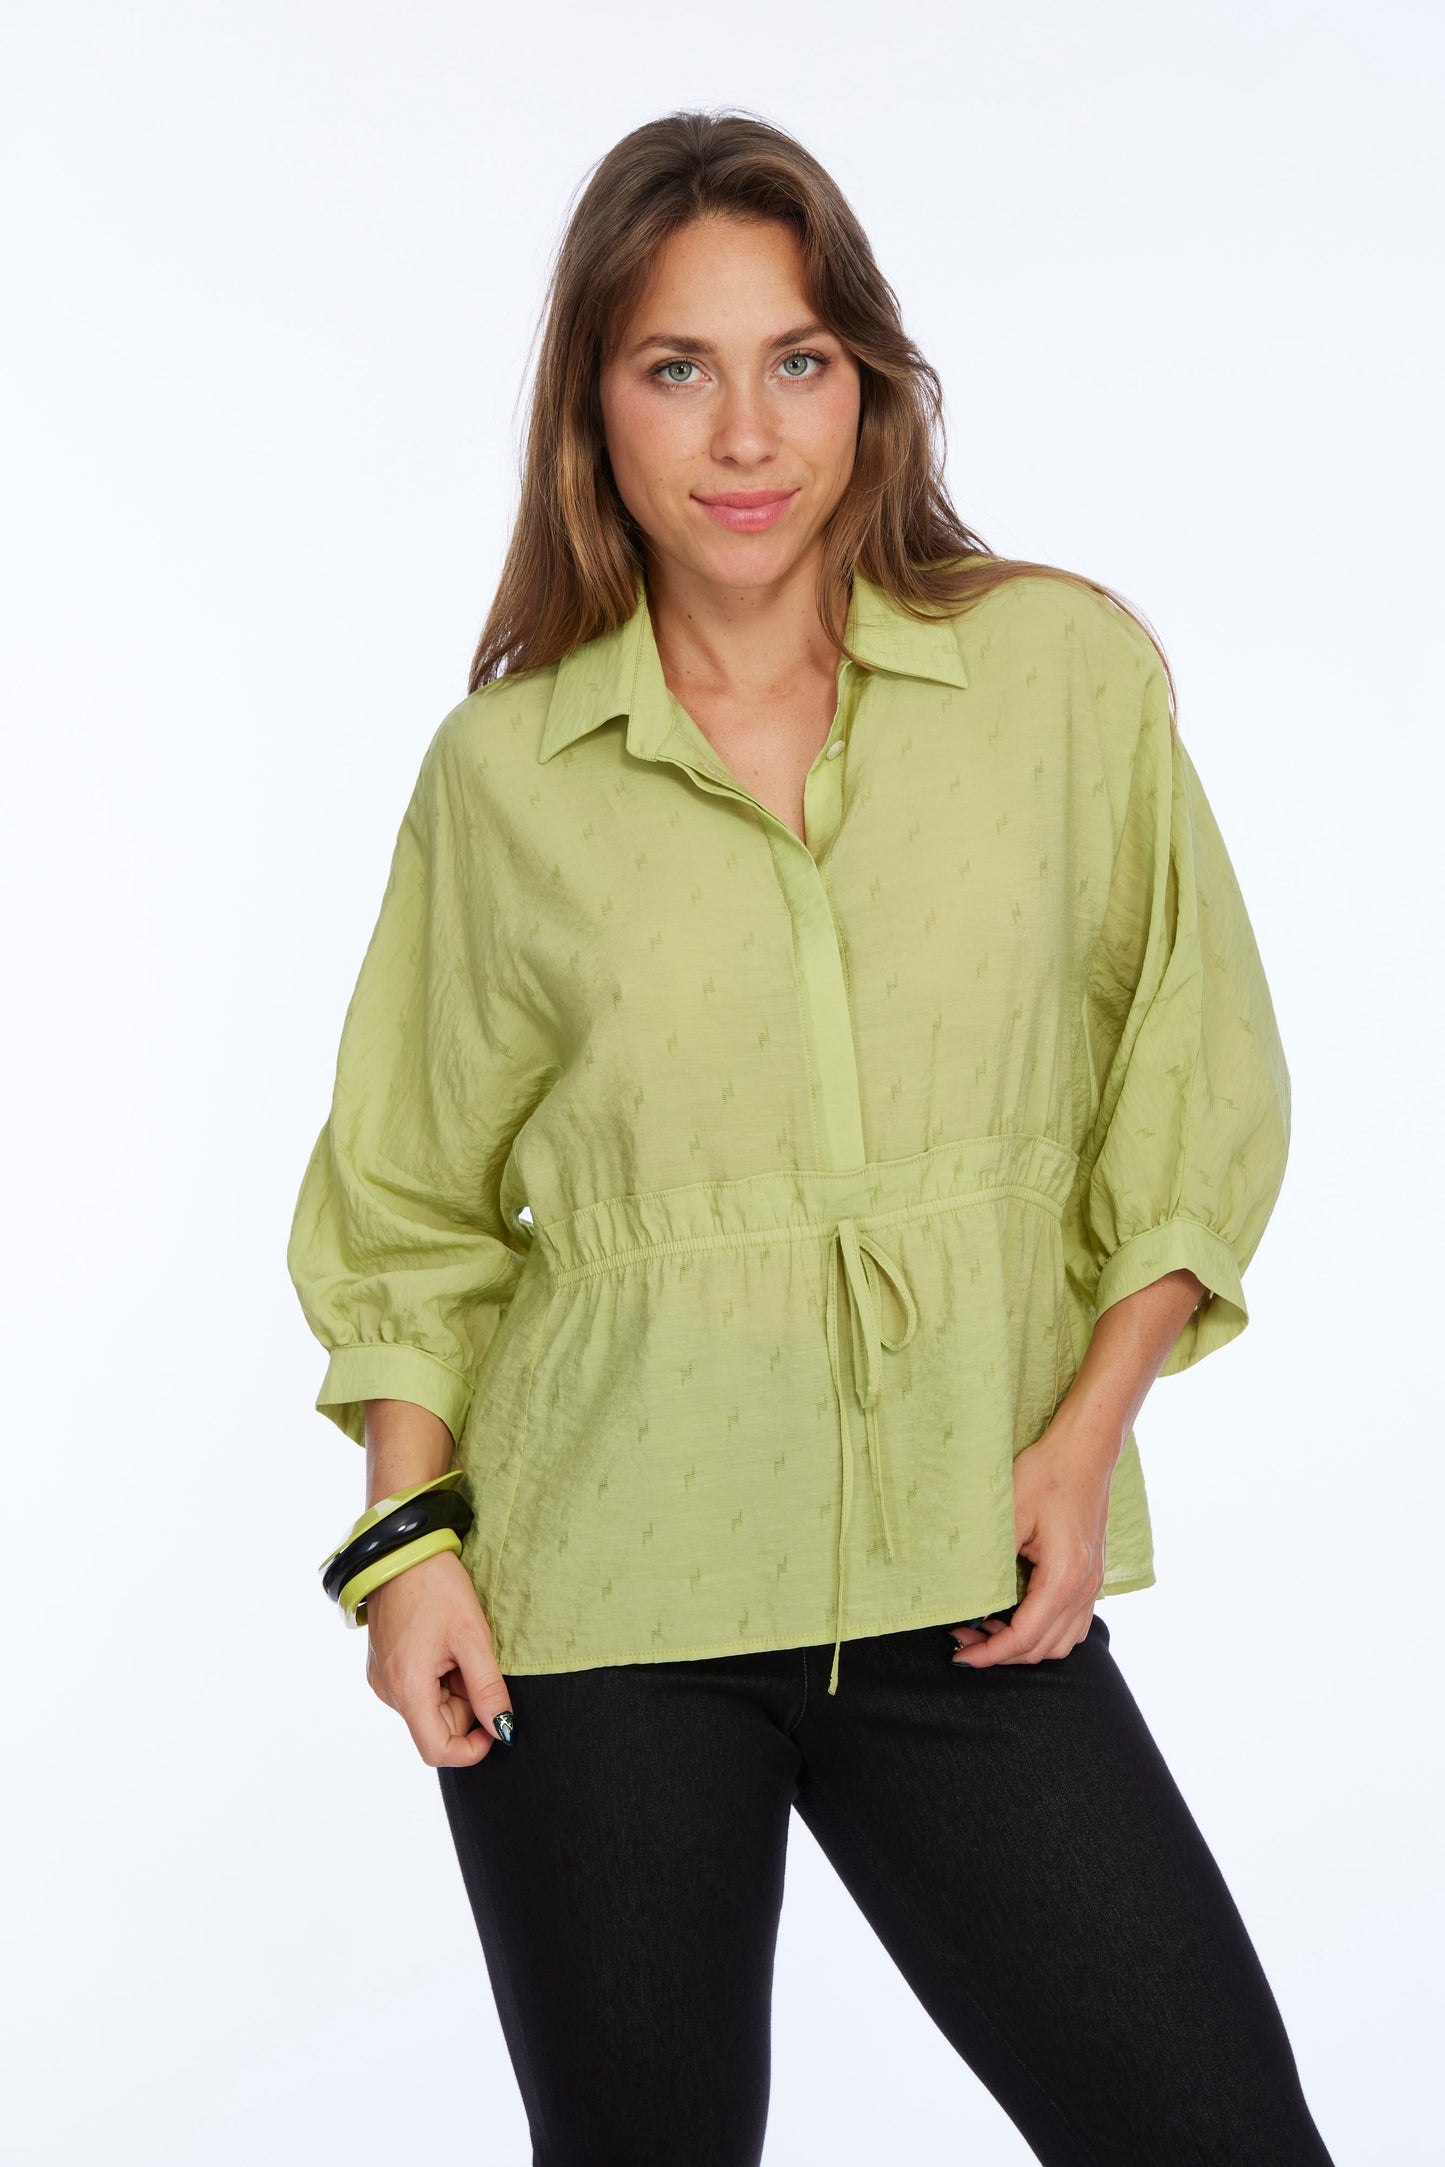 Women's Lime Pleated Drawstring Waist Blouse 3/4 Sleeves LIOR